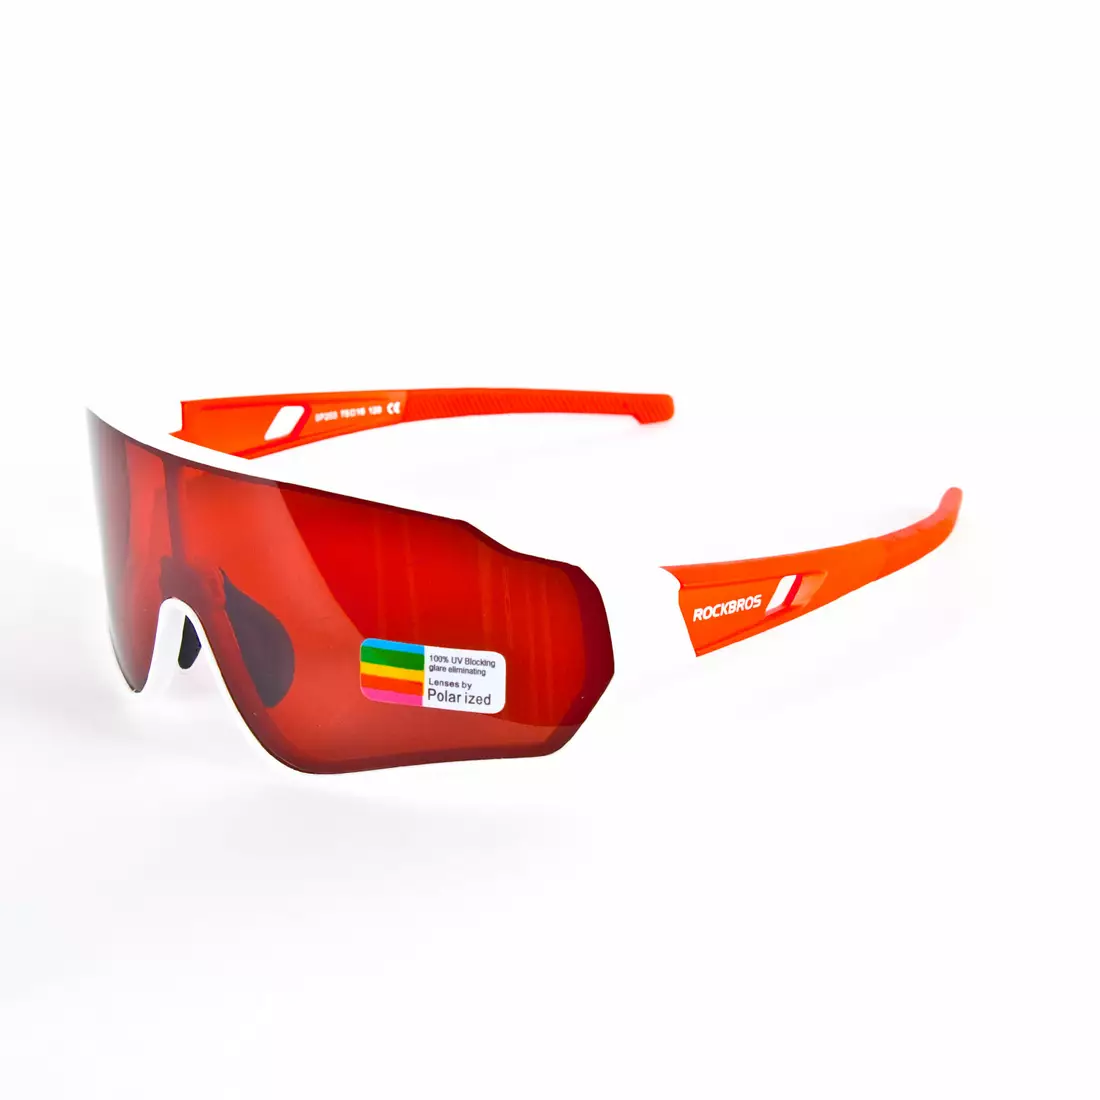 Rockbros 10162 bicycle sports glasses with polarized white-red